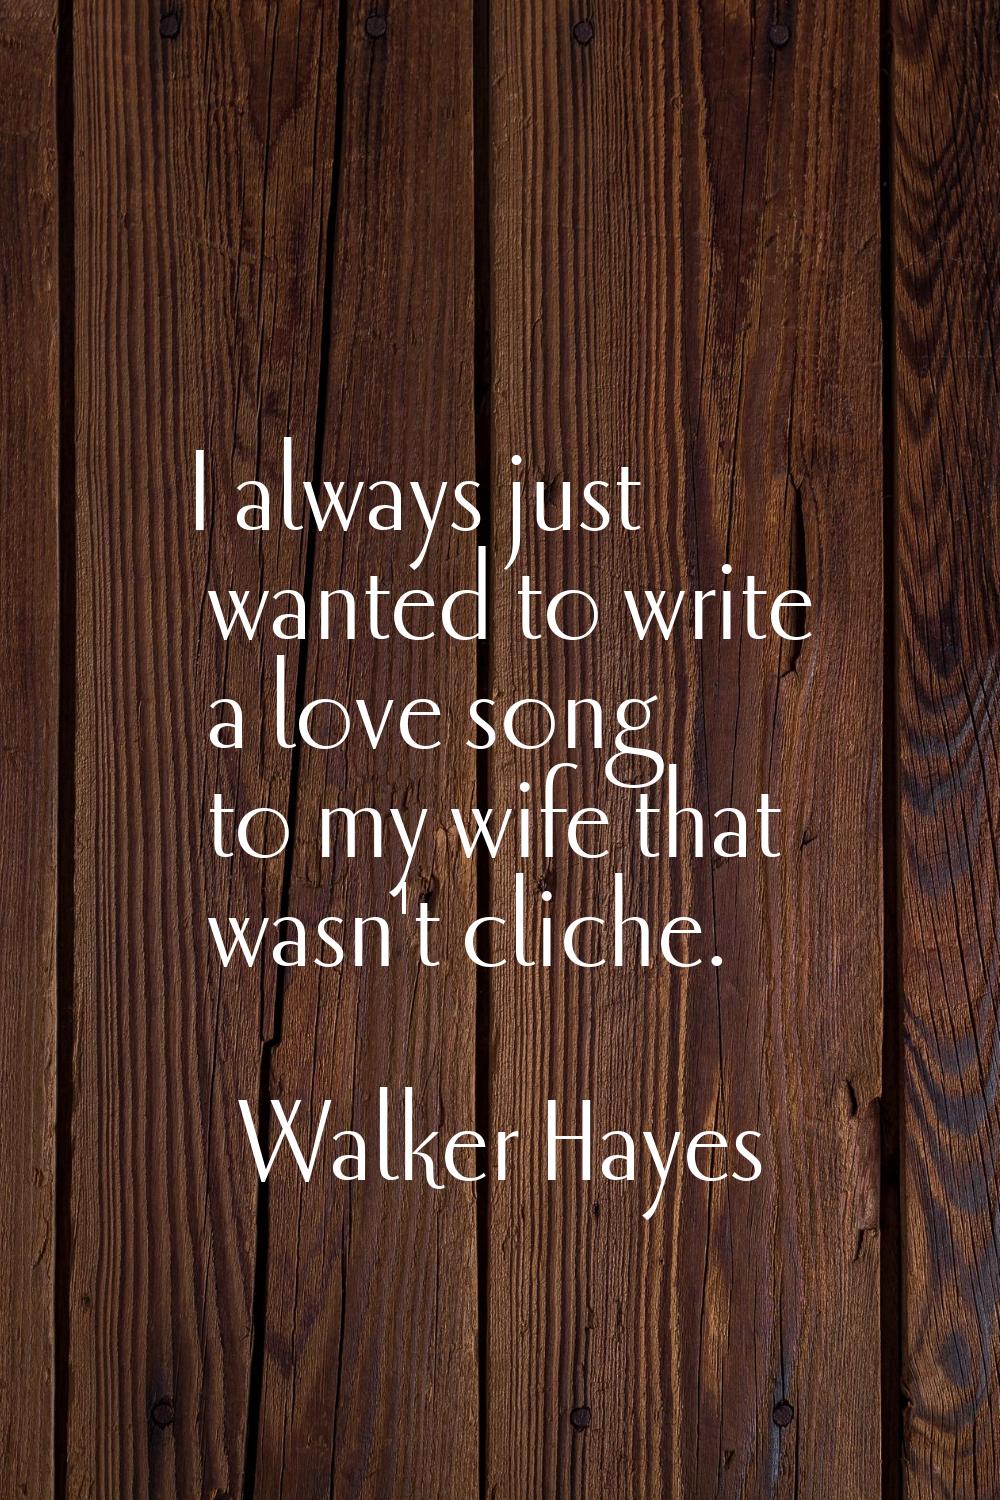 I always just wanted to write a love song to my wife that wasn't cliche.